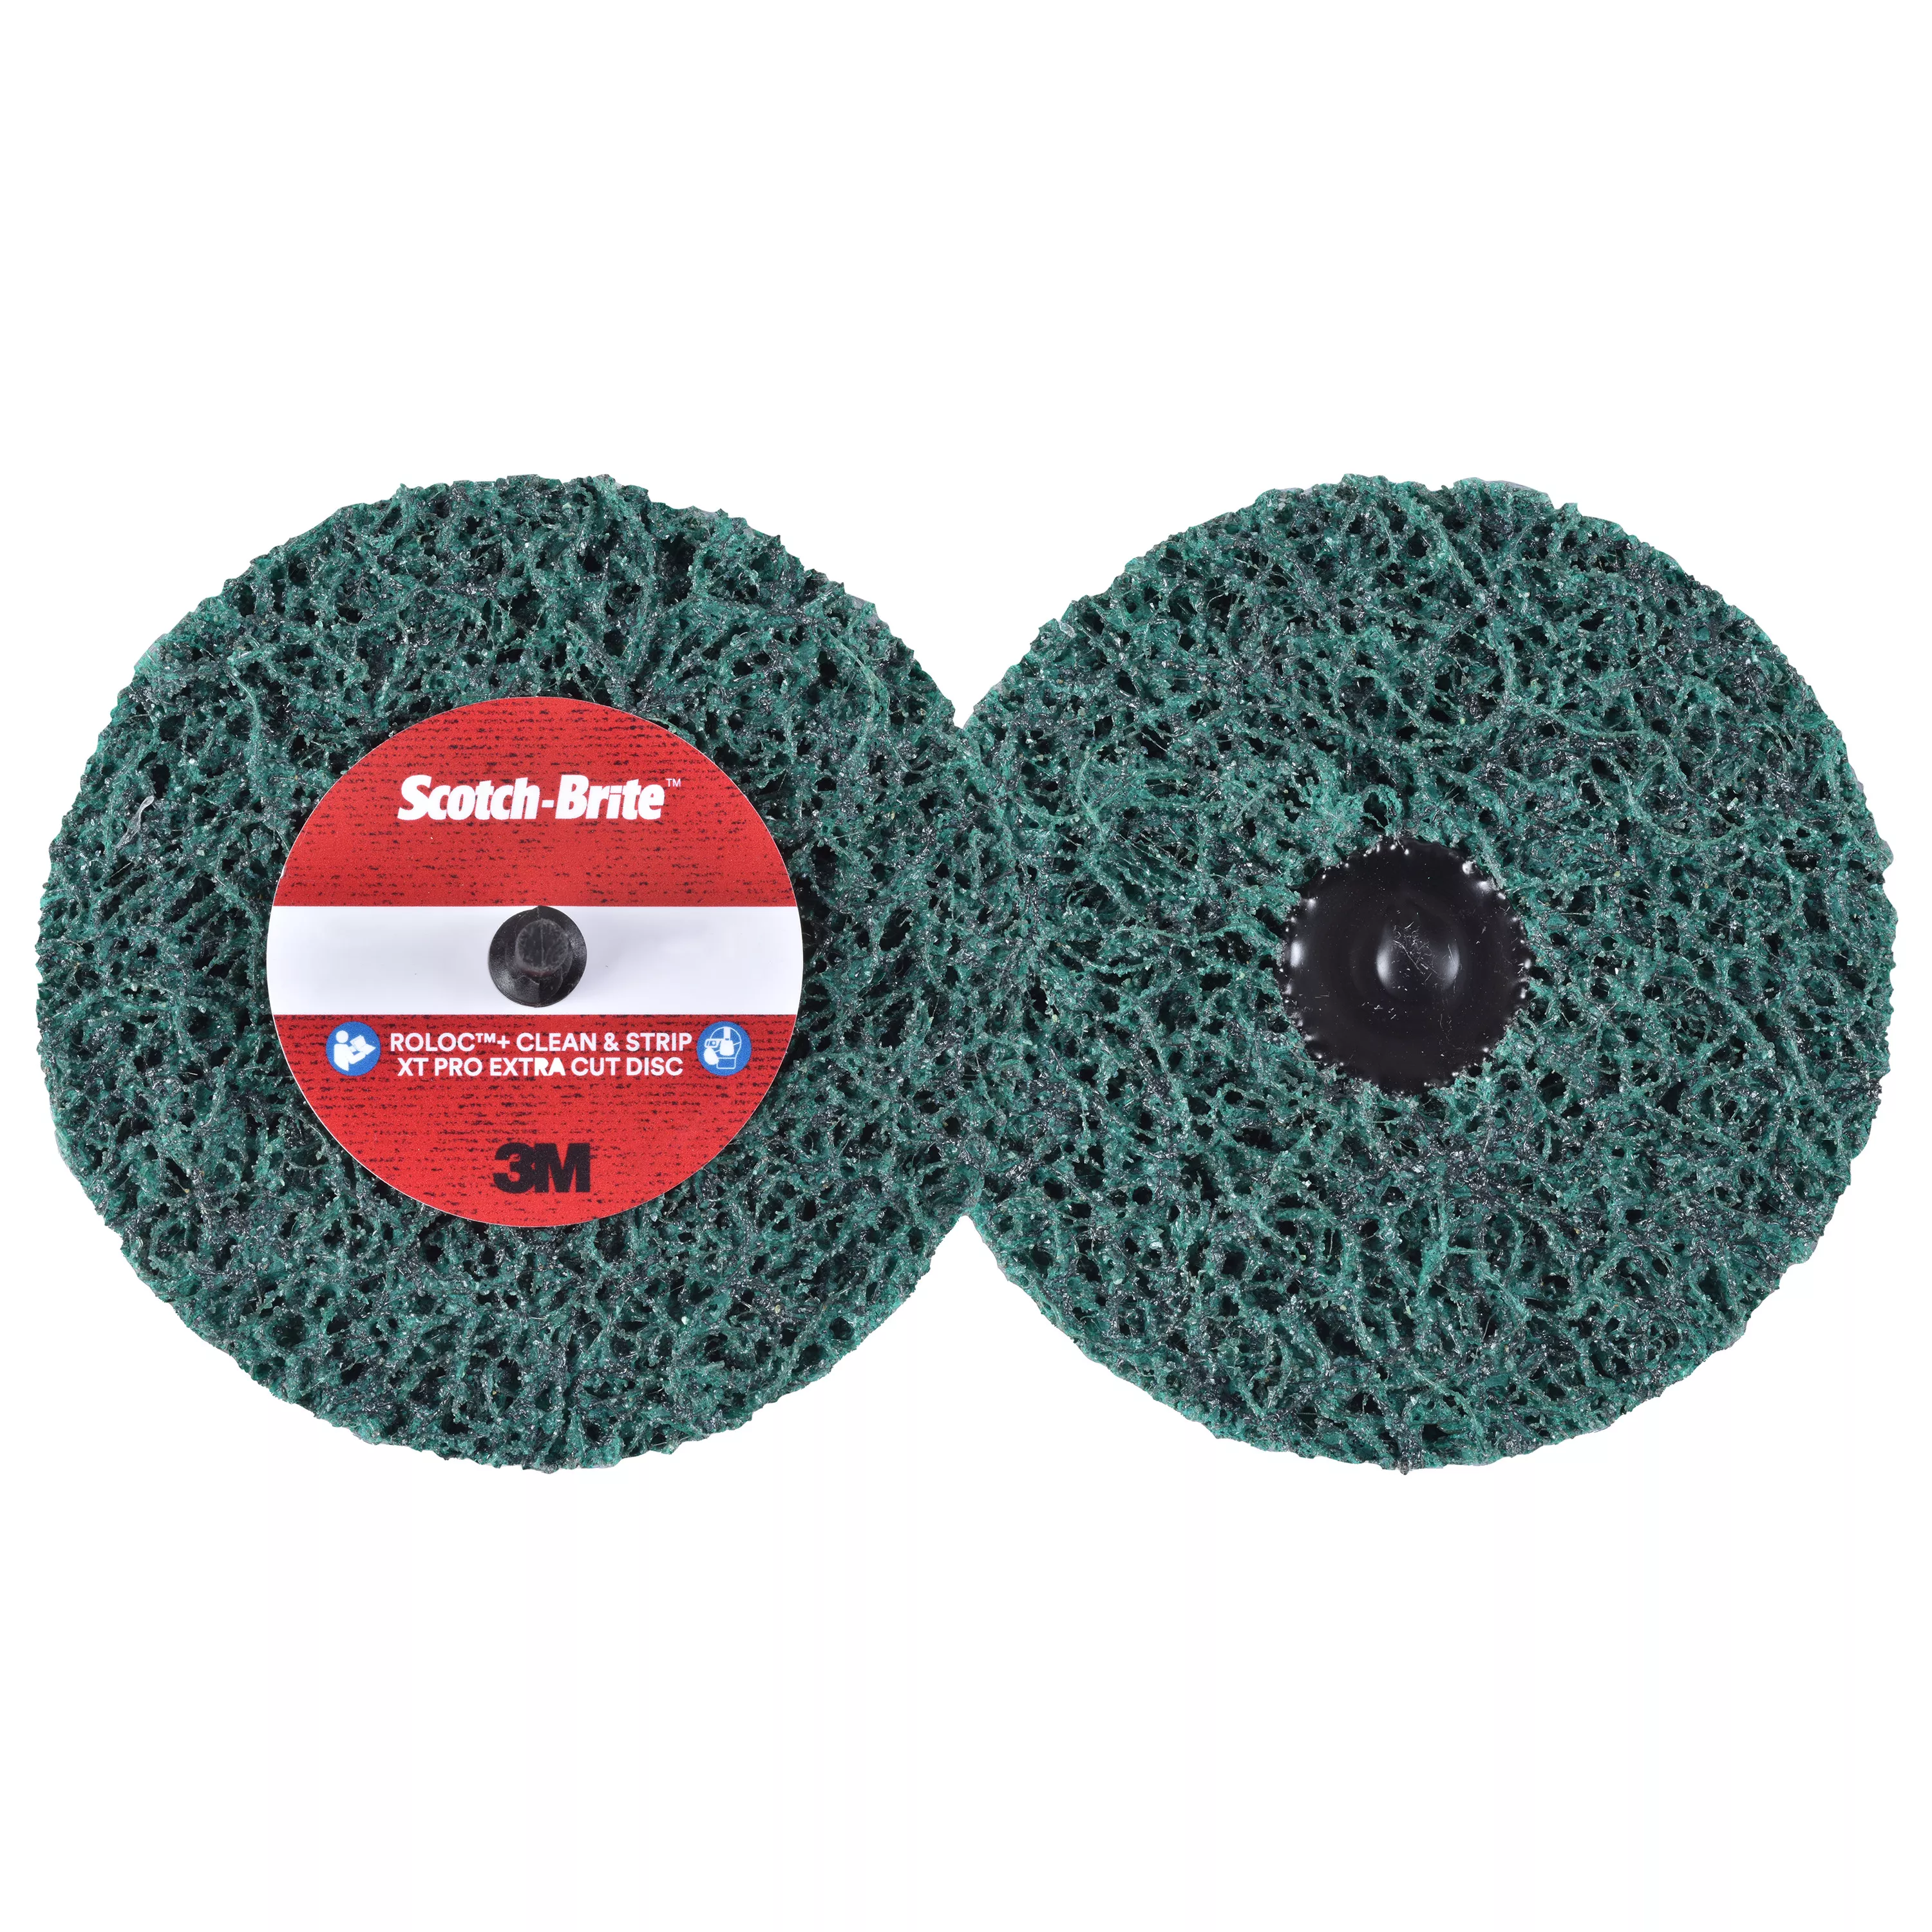 Scotch-Brite™ Roloc™+ Clean and Strip XT Pro Extra Cut Disc, XC-DR+, A/O Extra Coarse, TR+, Green, 4 in x 1 in, 2 Ply, 10 ea/Case